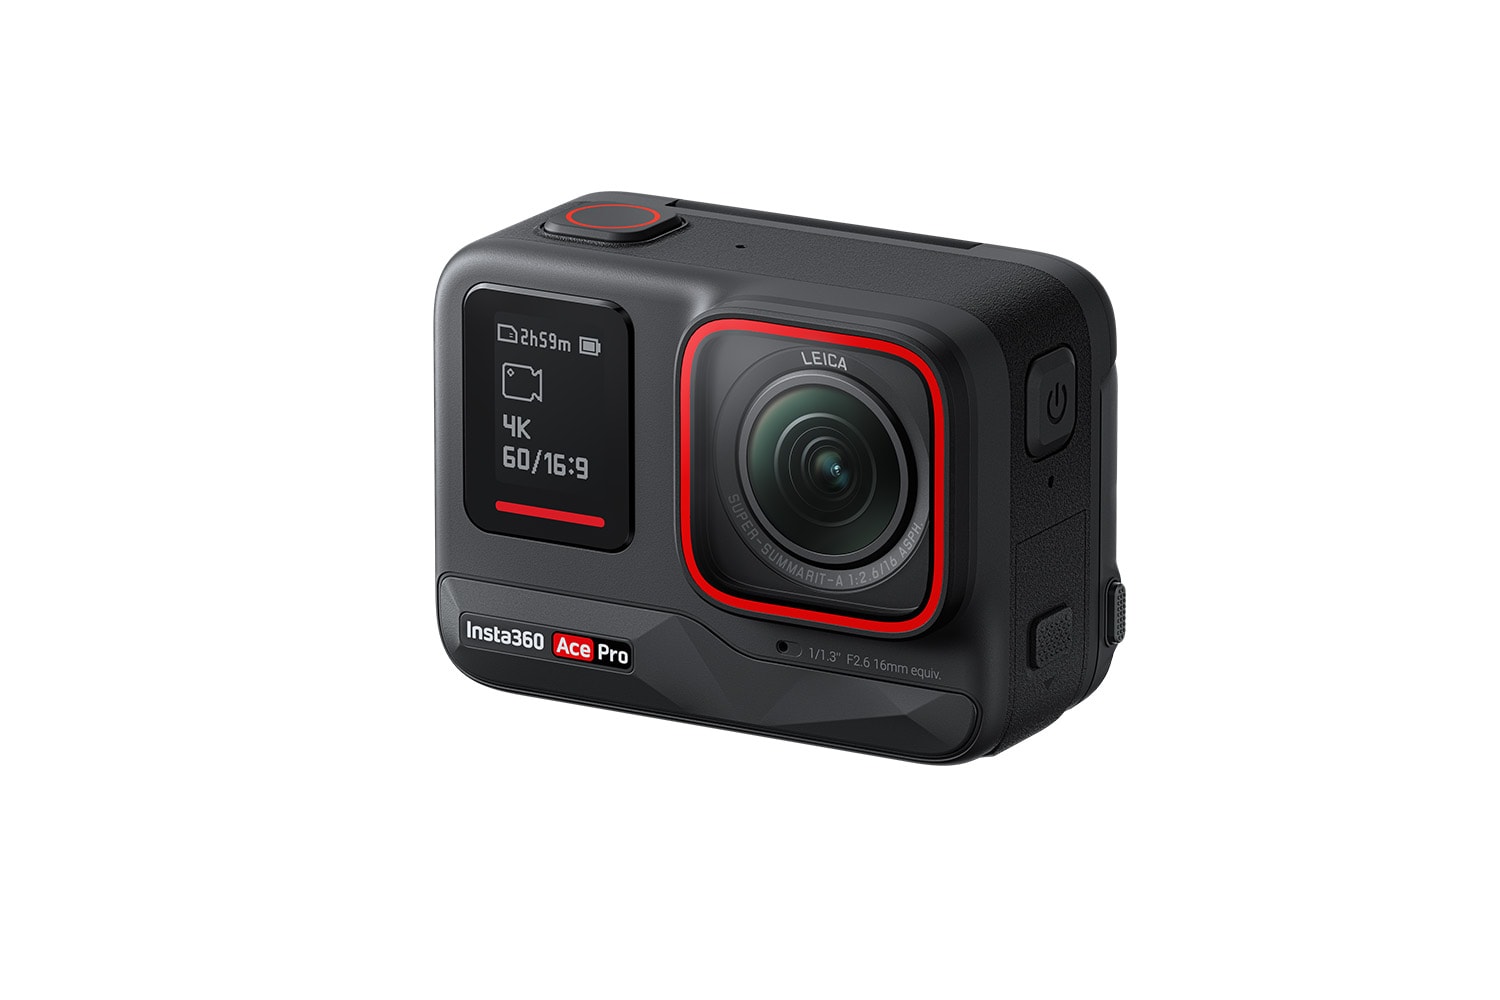 Insta360 and Leica Launch New Action Cameras Vlogging Youtube GoPro DJI